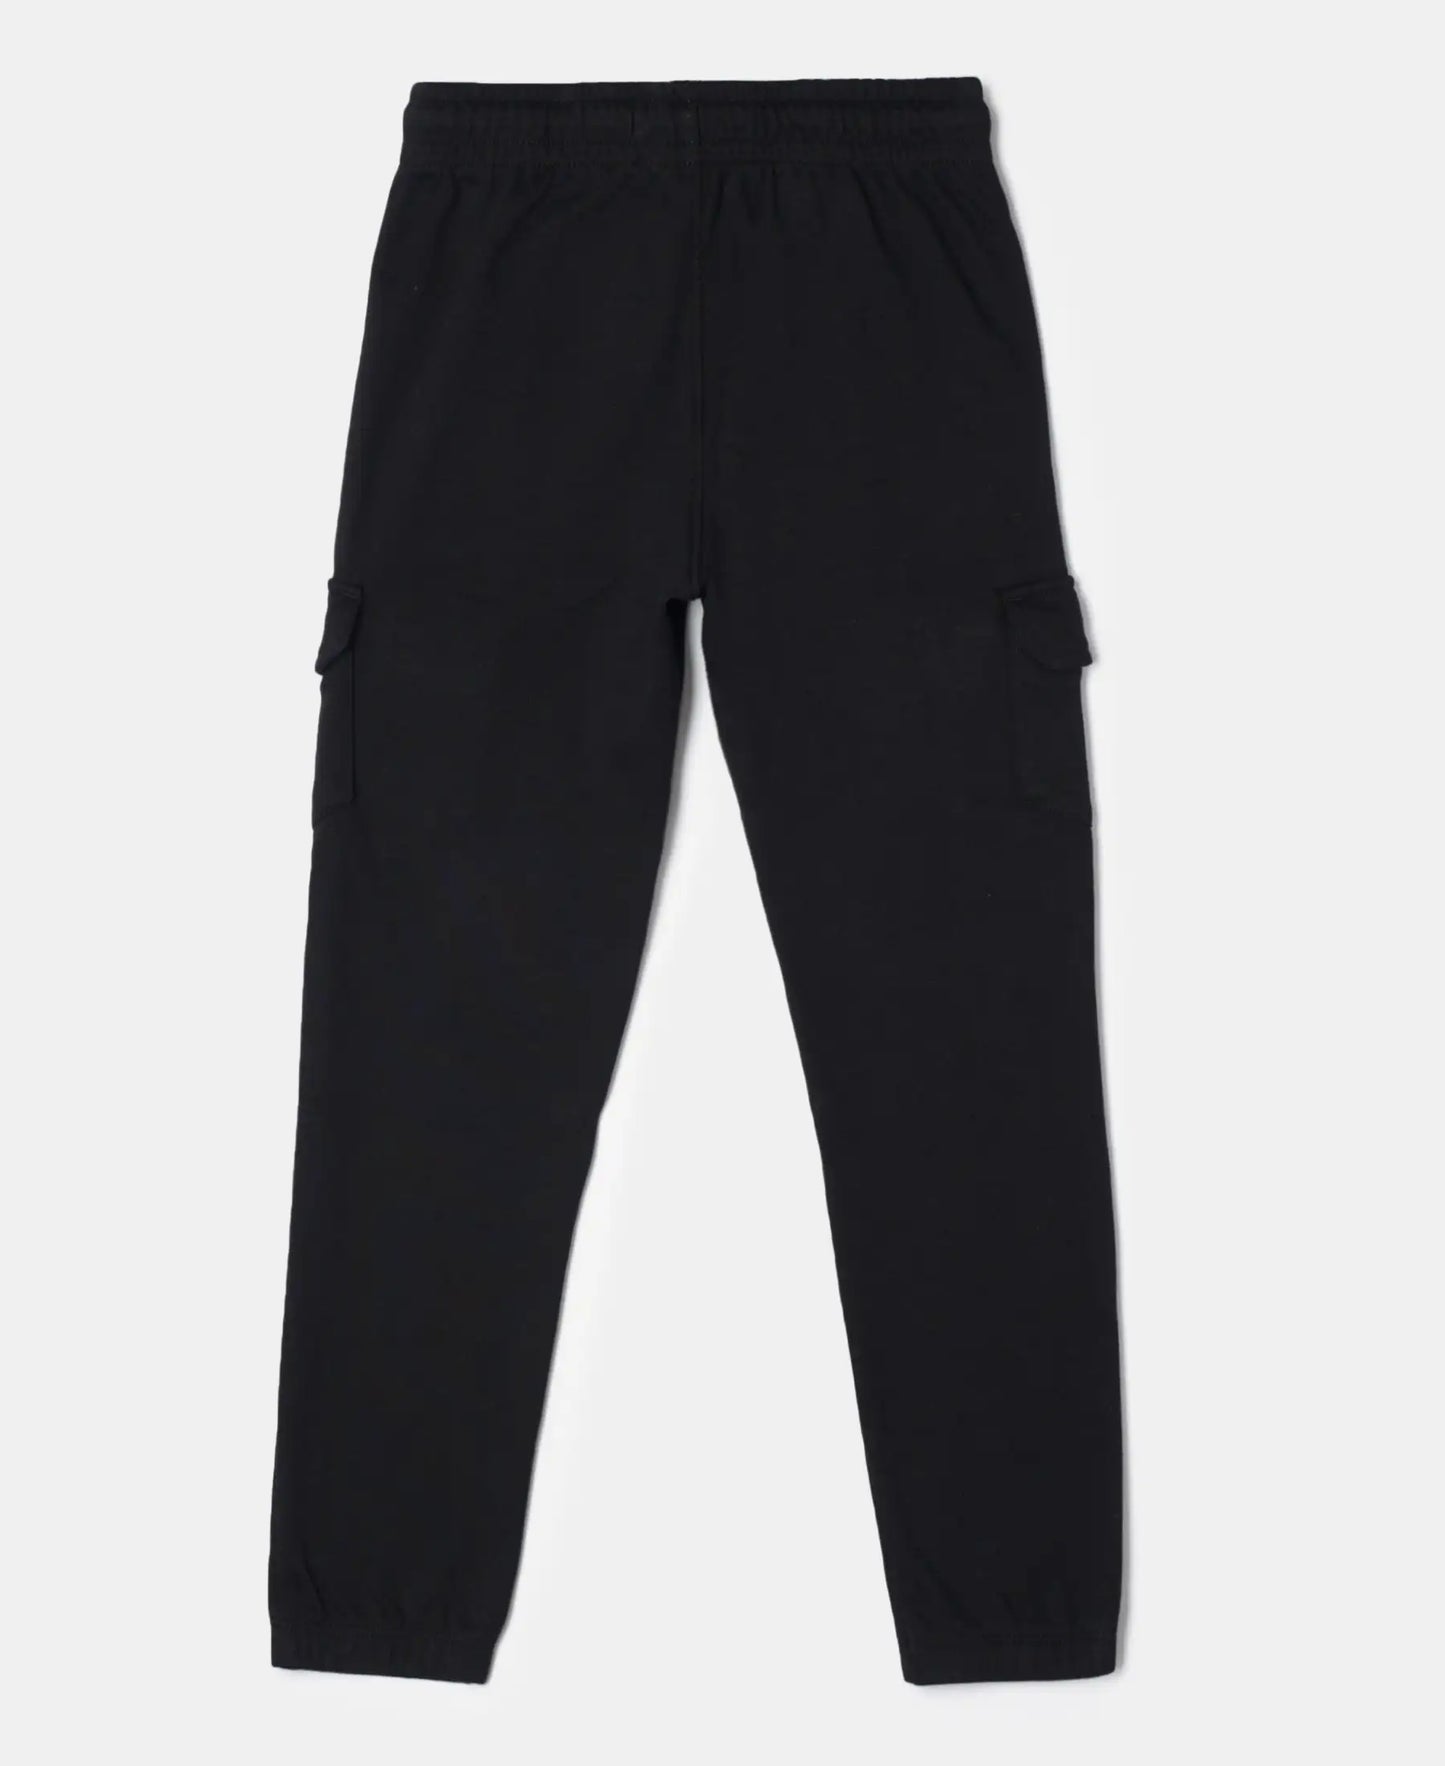 Super Combed Cotton Rich Cargo Pants with Cuffed Hem - Black-2